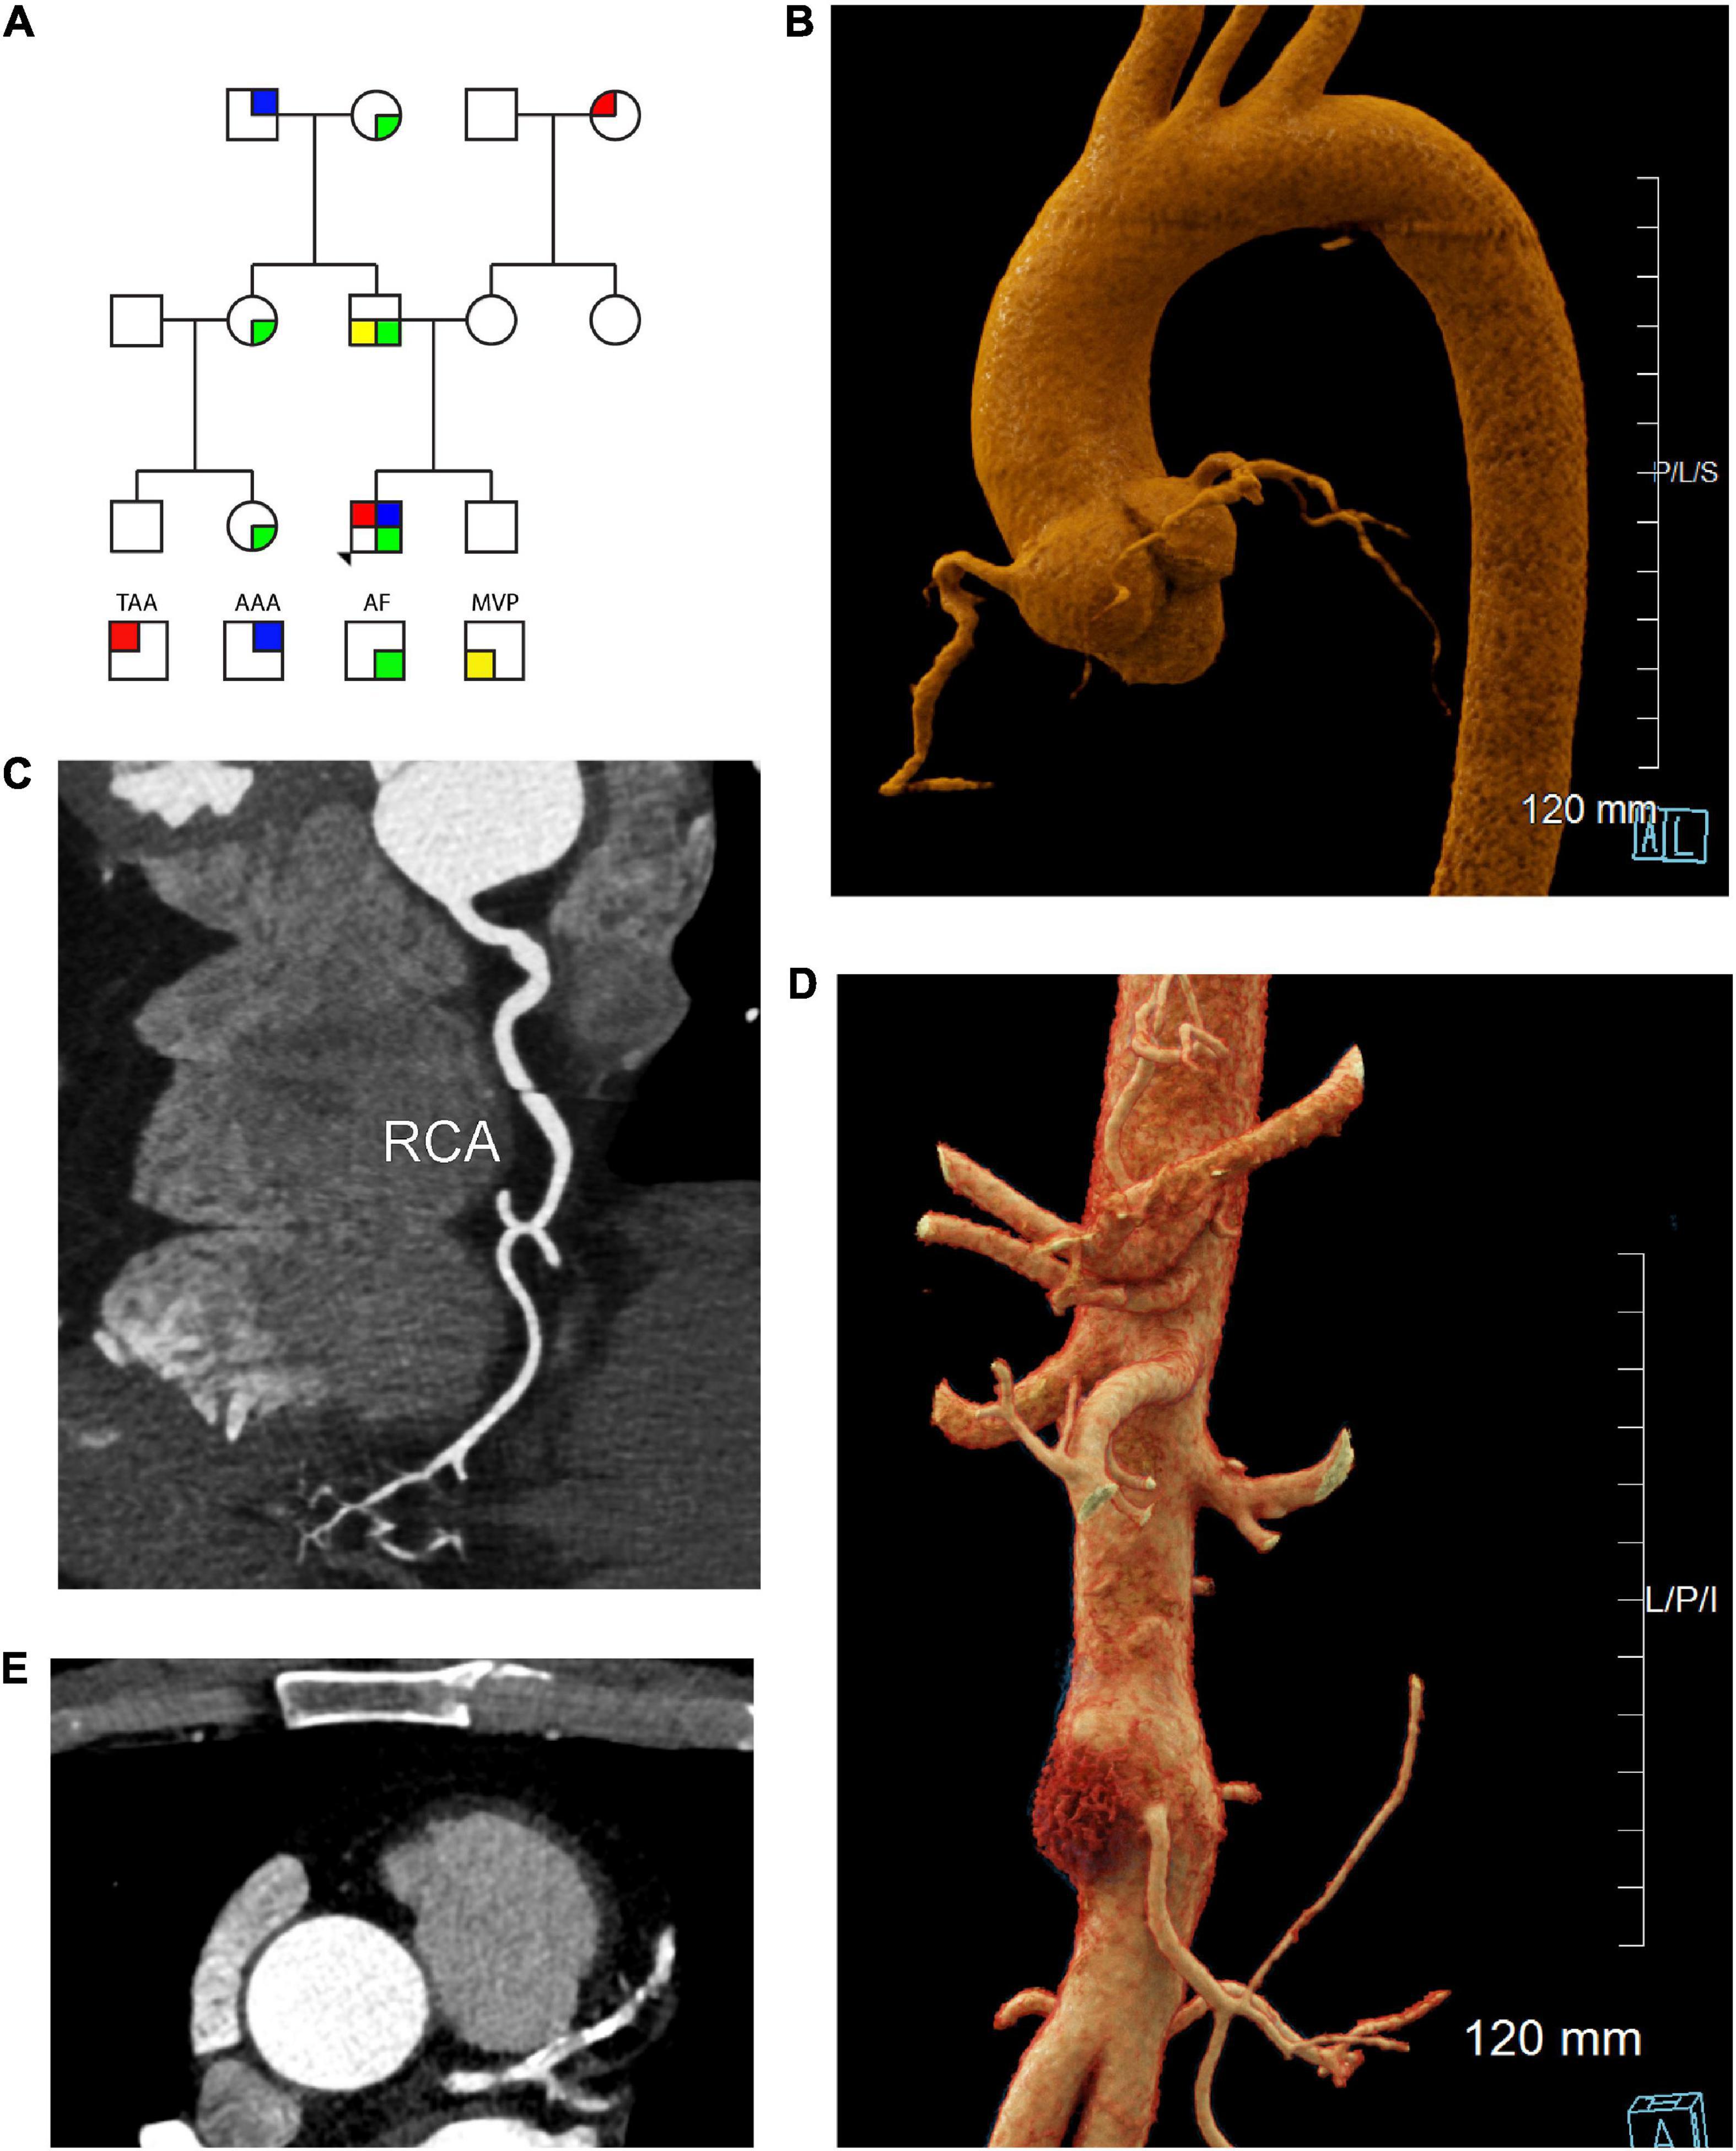 Novel SMAD3 variant identified in a patient with familial aortopathy modeled using a zebrafish embryo assay